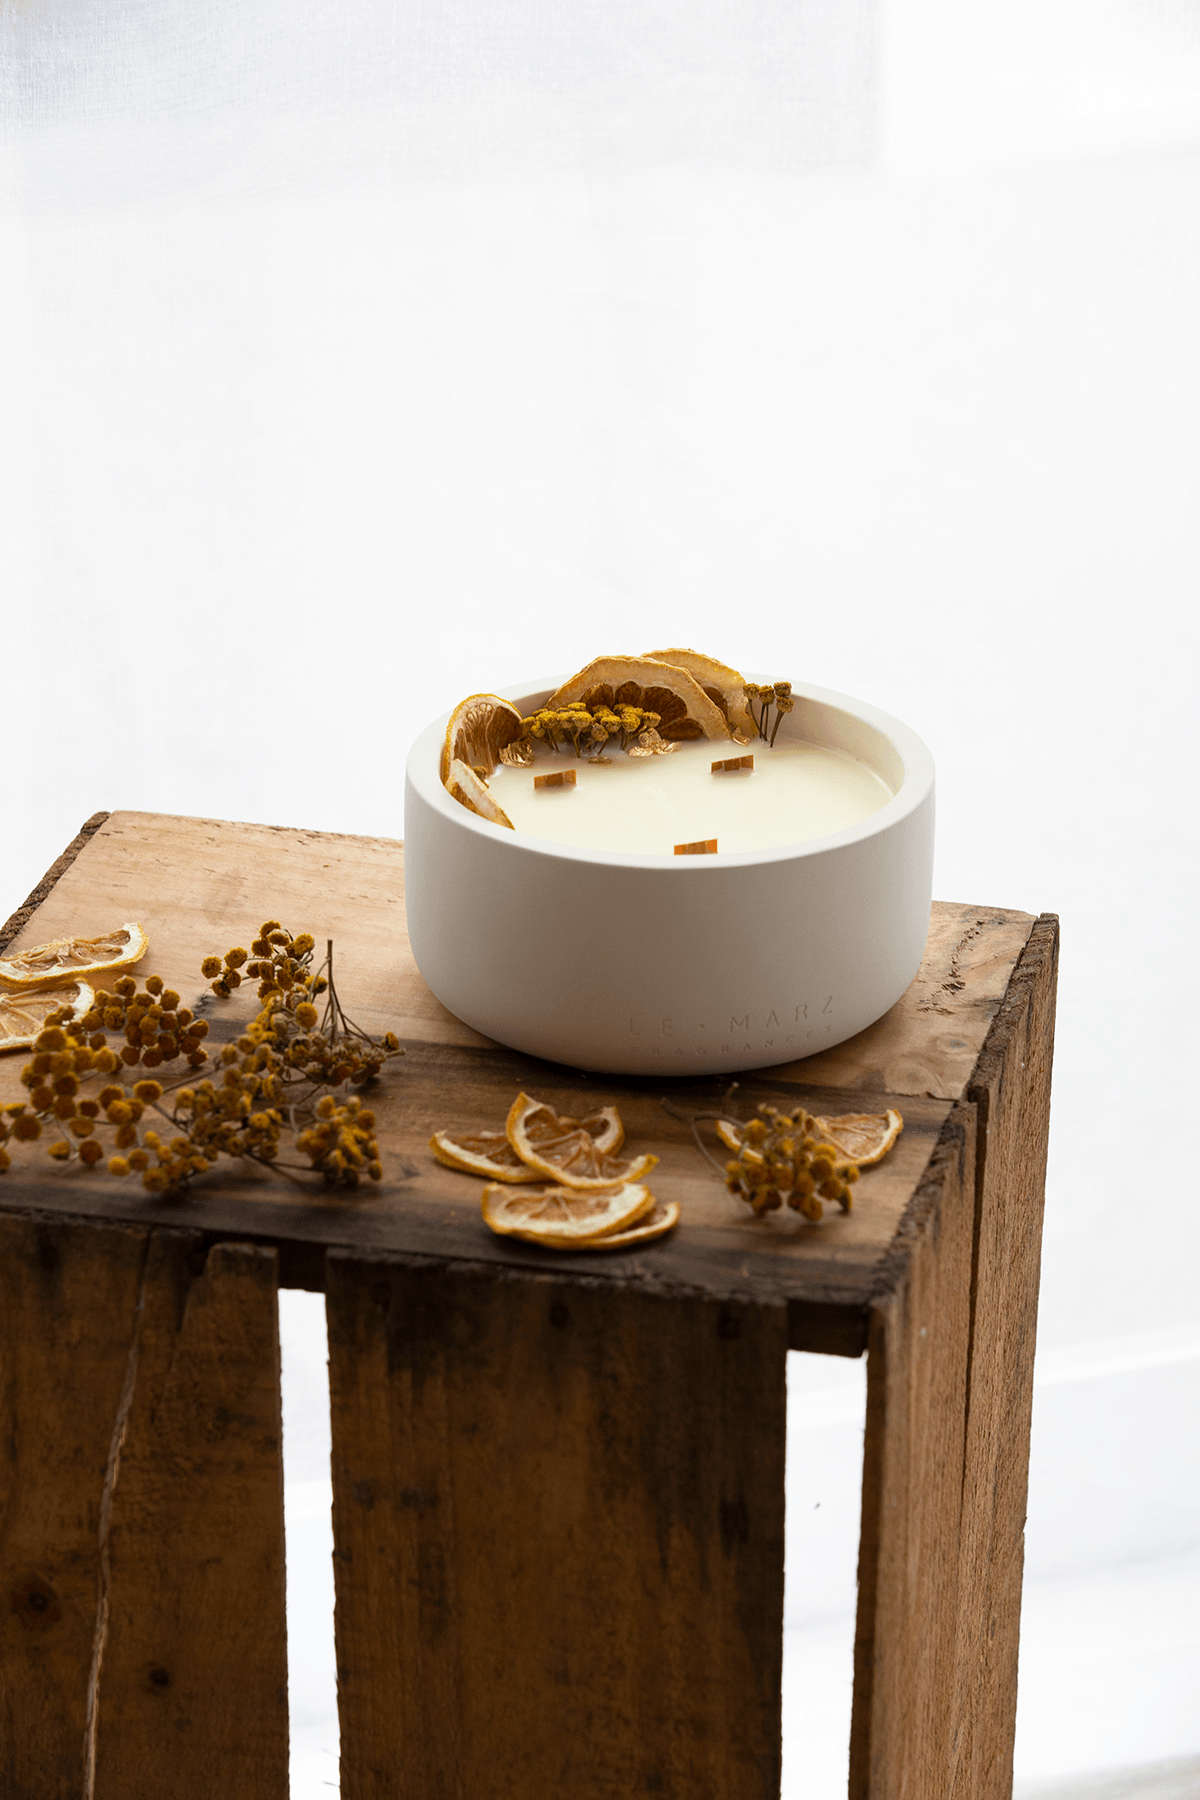 lemon candle, wood wick, gift ideas, concrete candles, house warming gift, luxury candles, pretty candles, white candle, home decor, vegan candles, coconut wax candle, wood wick candle, candles